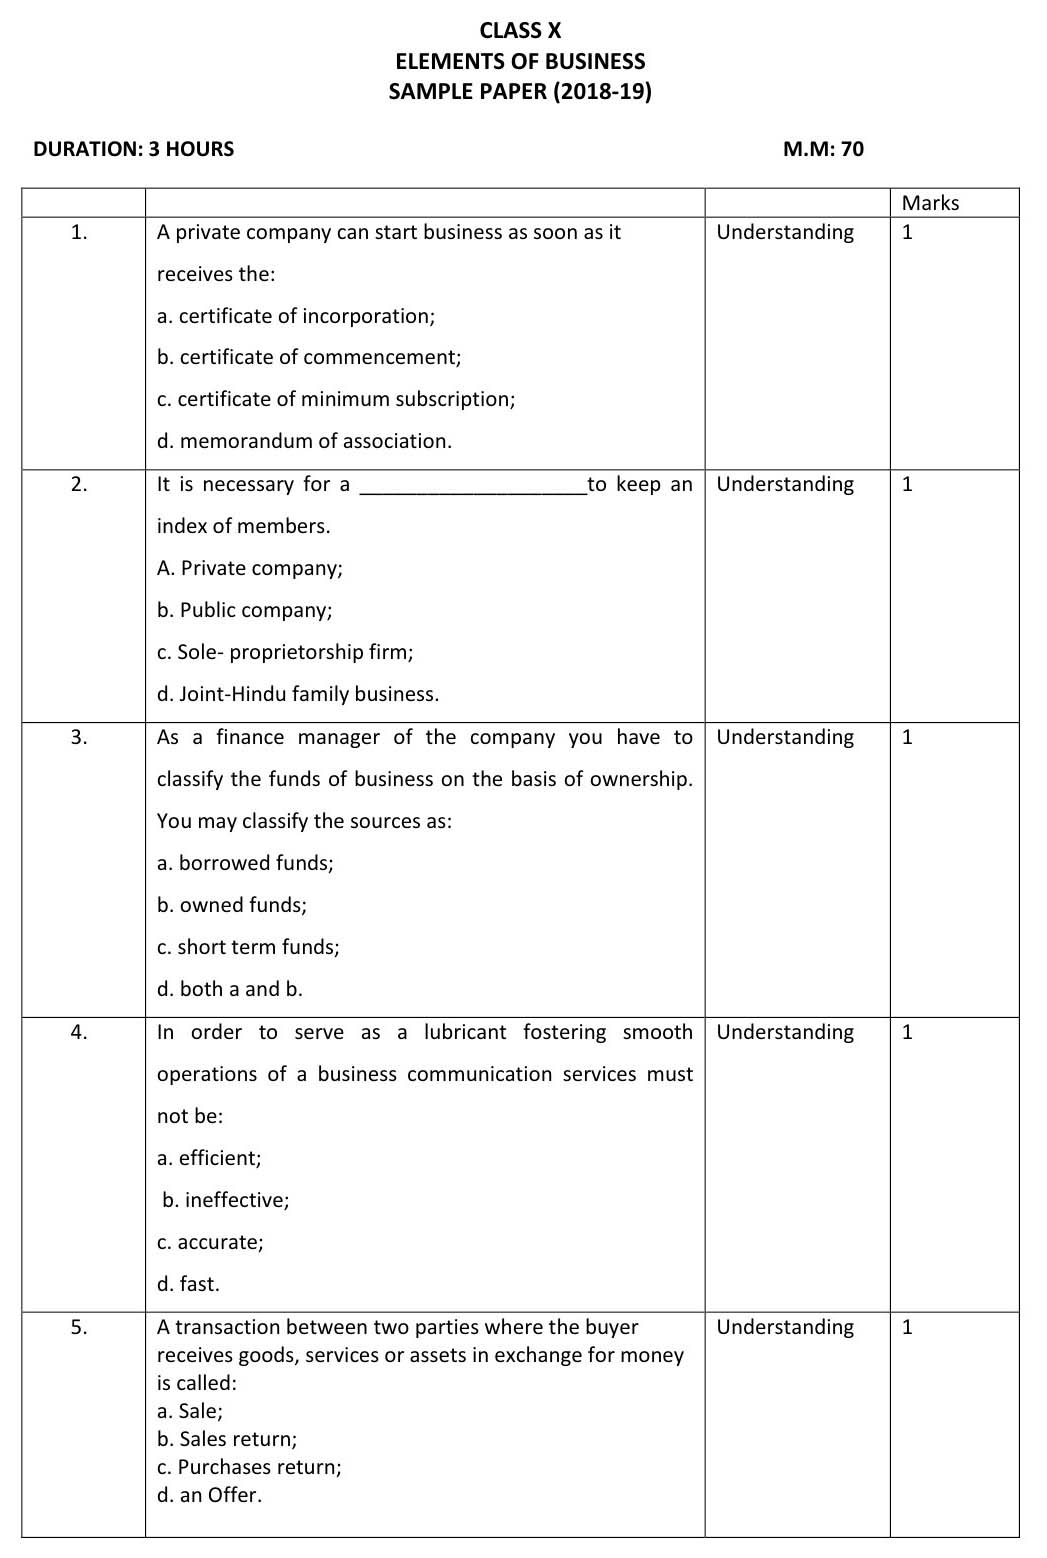 Element of Business CBSE Class X Sample Question Paper 2018-19 - Image 1